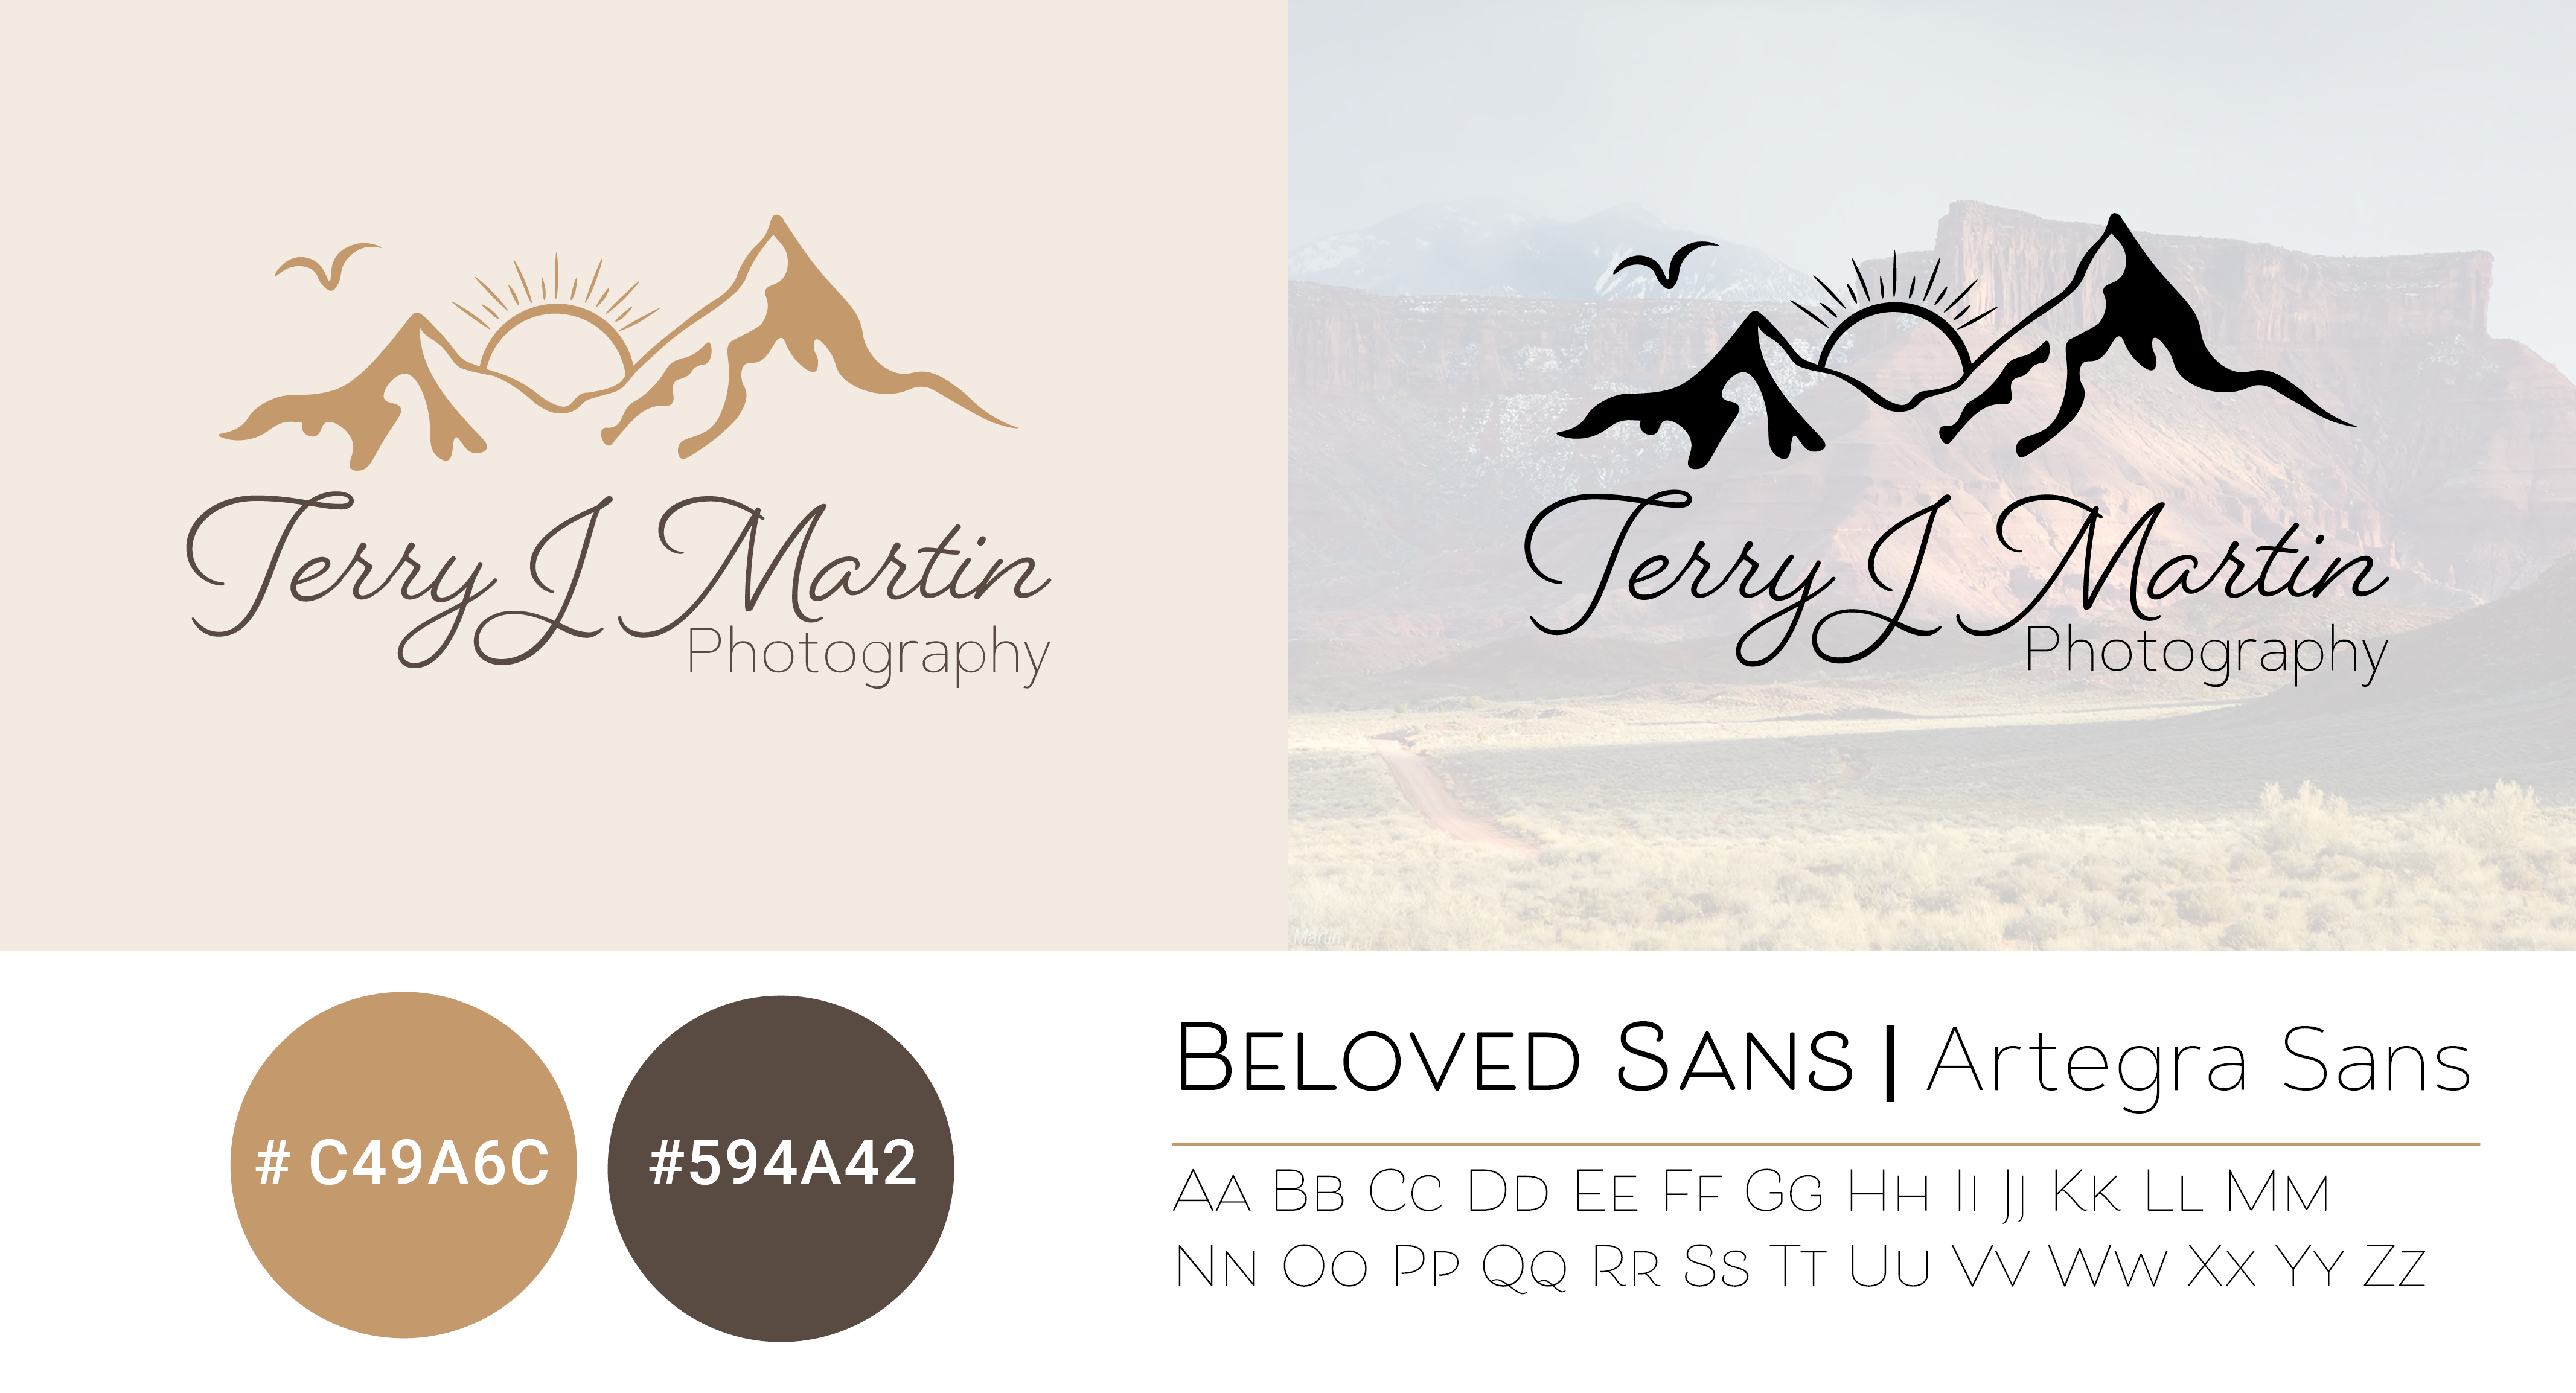 Branding for Terry J Martin Photography.